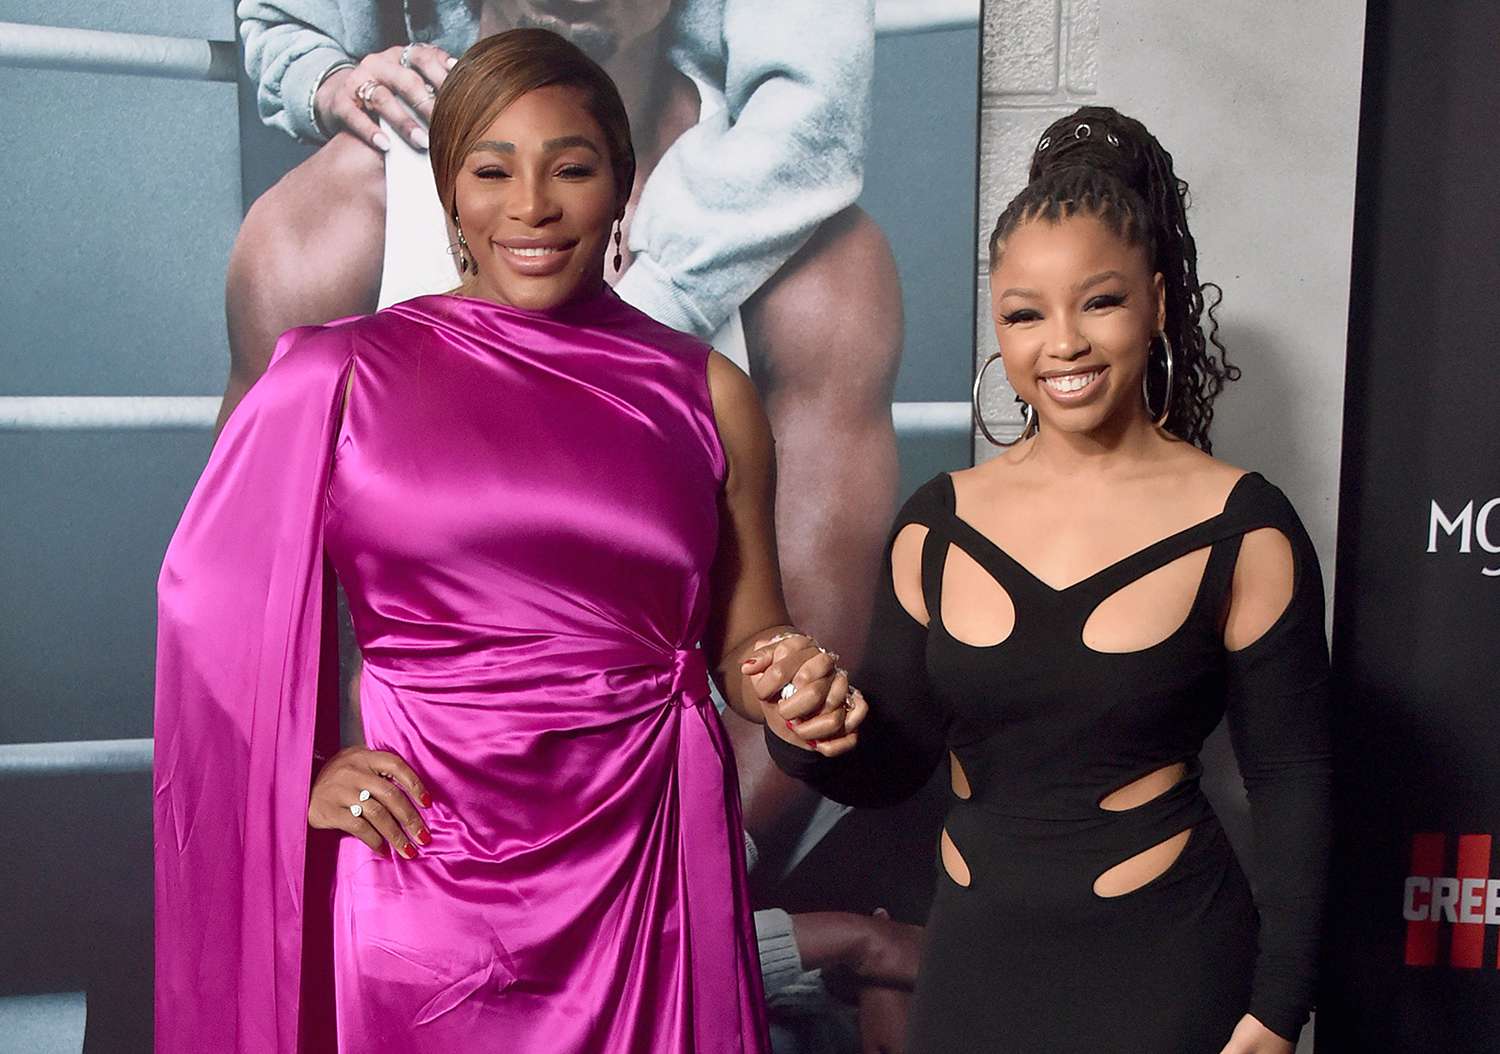 Serena Williams and Chlöe attend the Los Angeles Premiere of "CREED III"